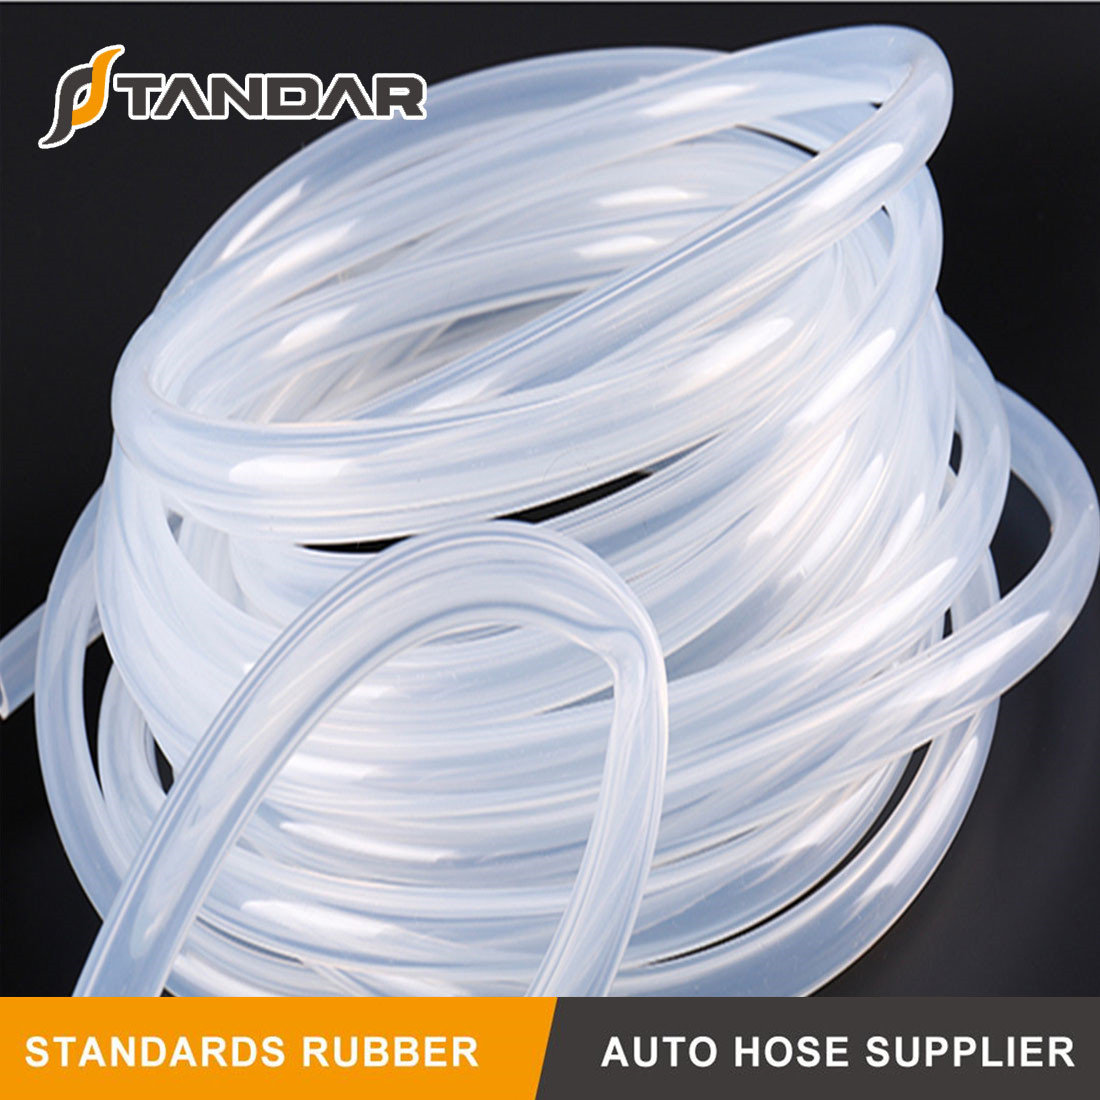 What is the difference between the three types of silicone hose,rubber hose,latex hose?